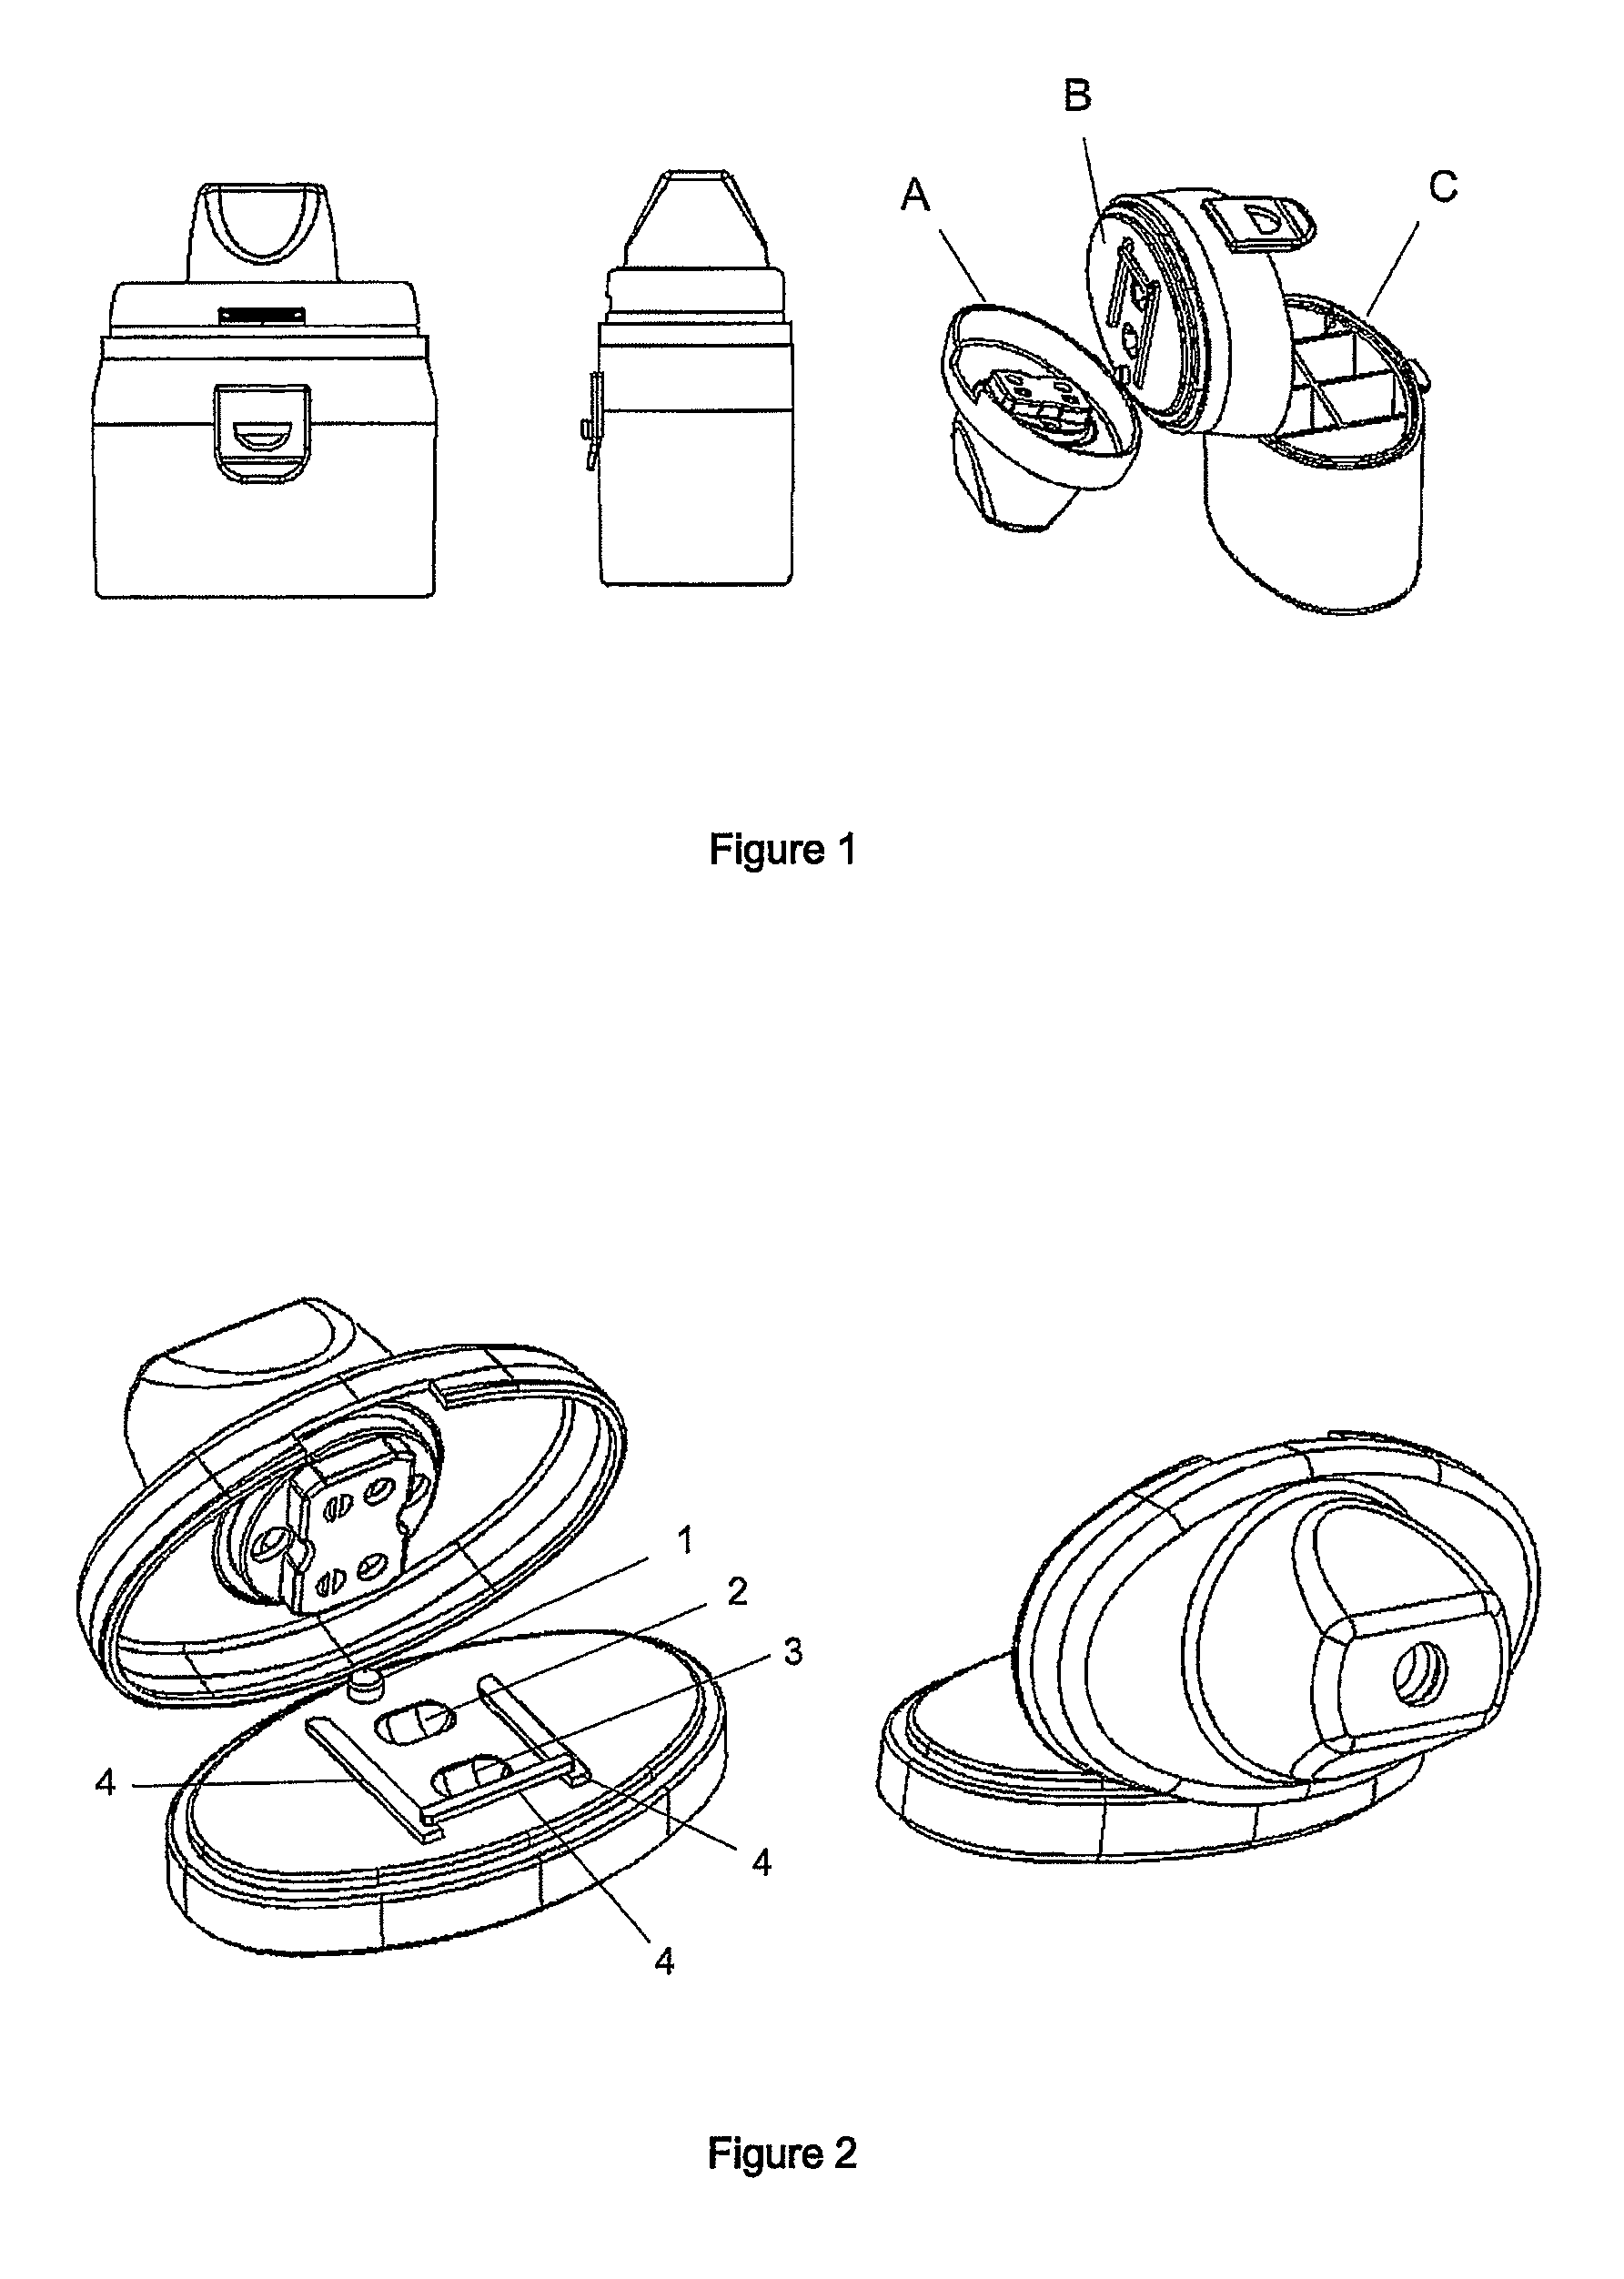 Dry powder inhalation device for the simultaneous administration of more than one medicament